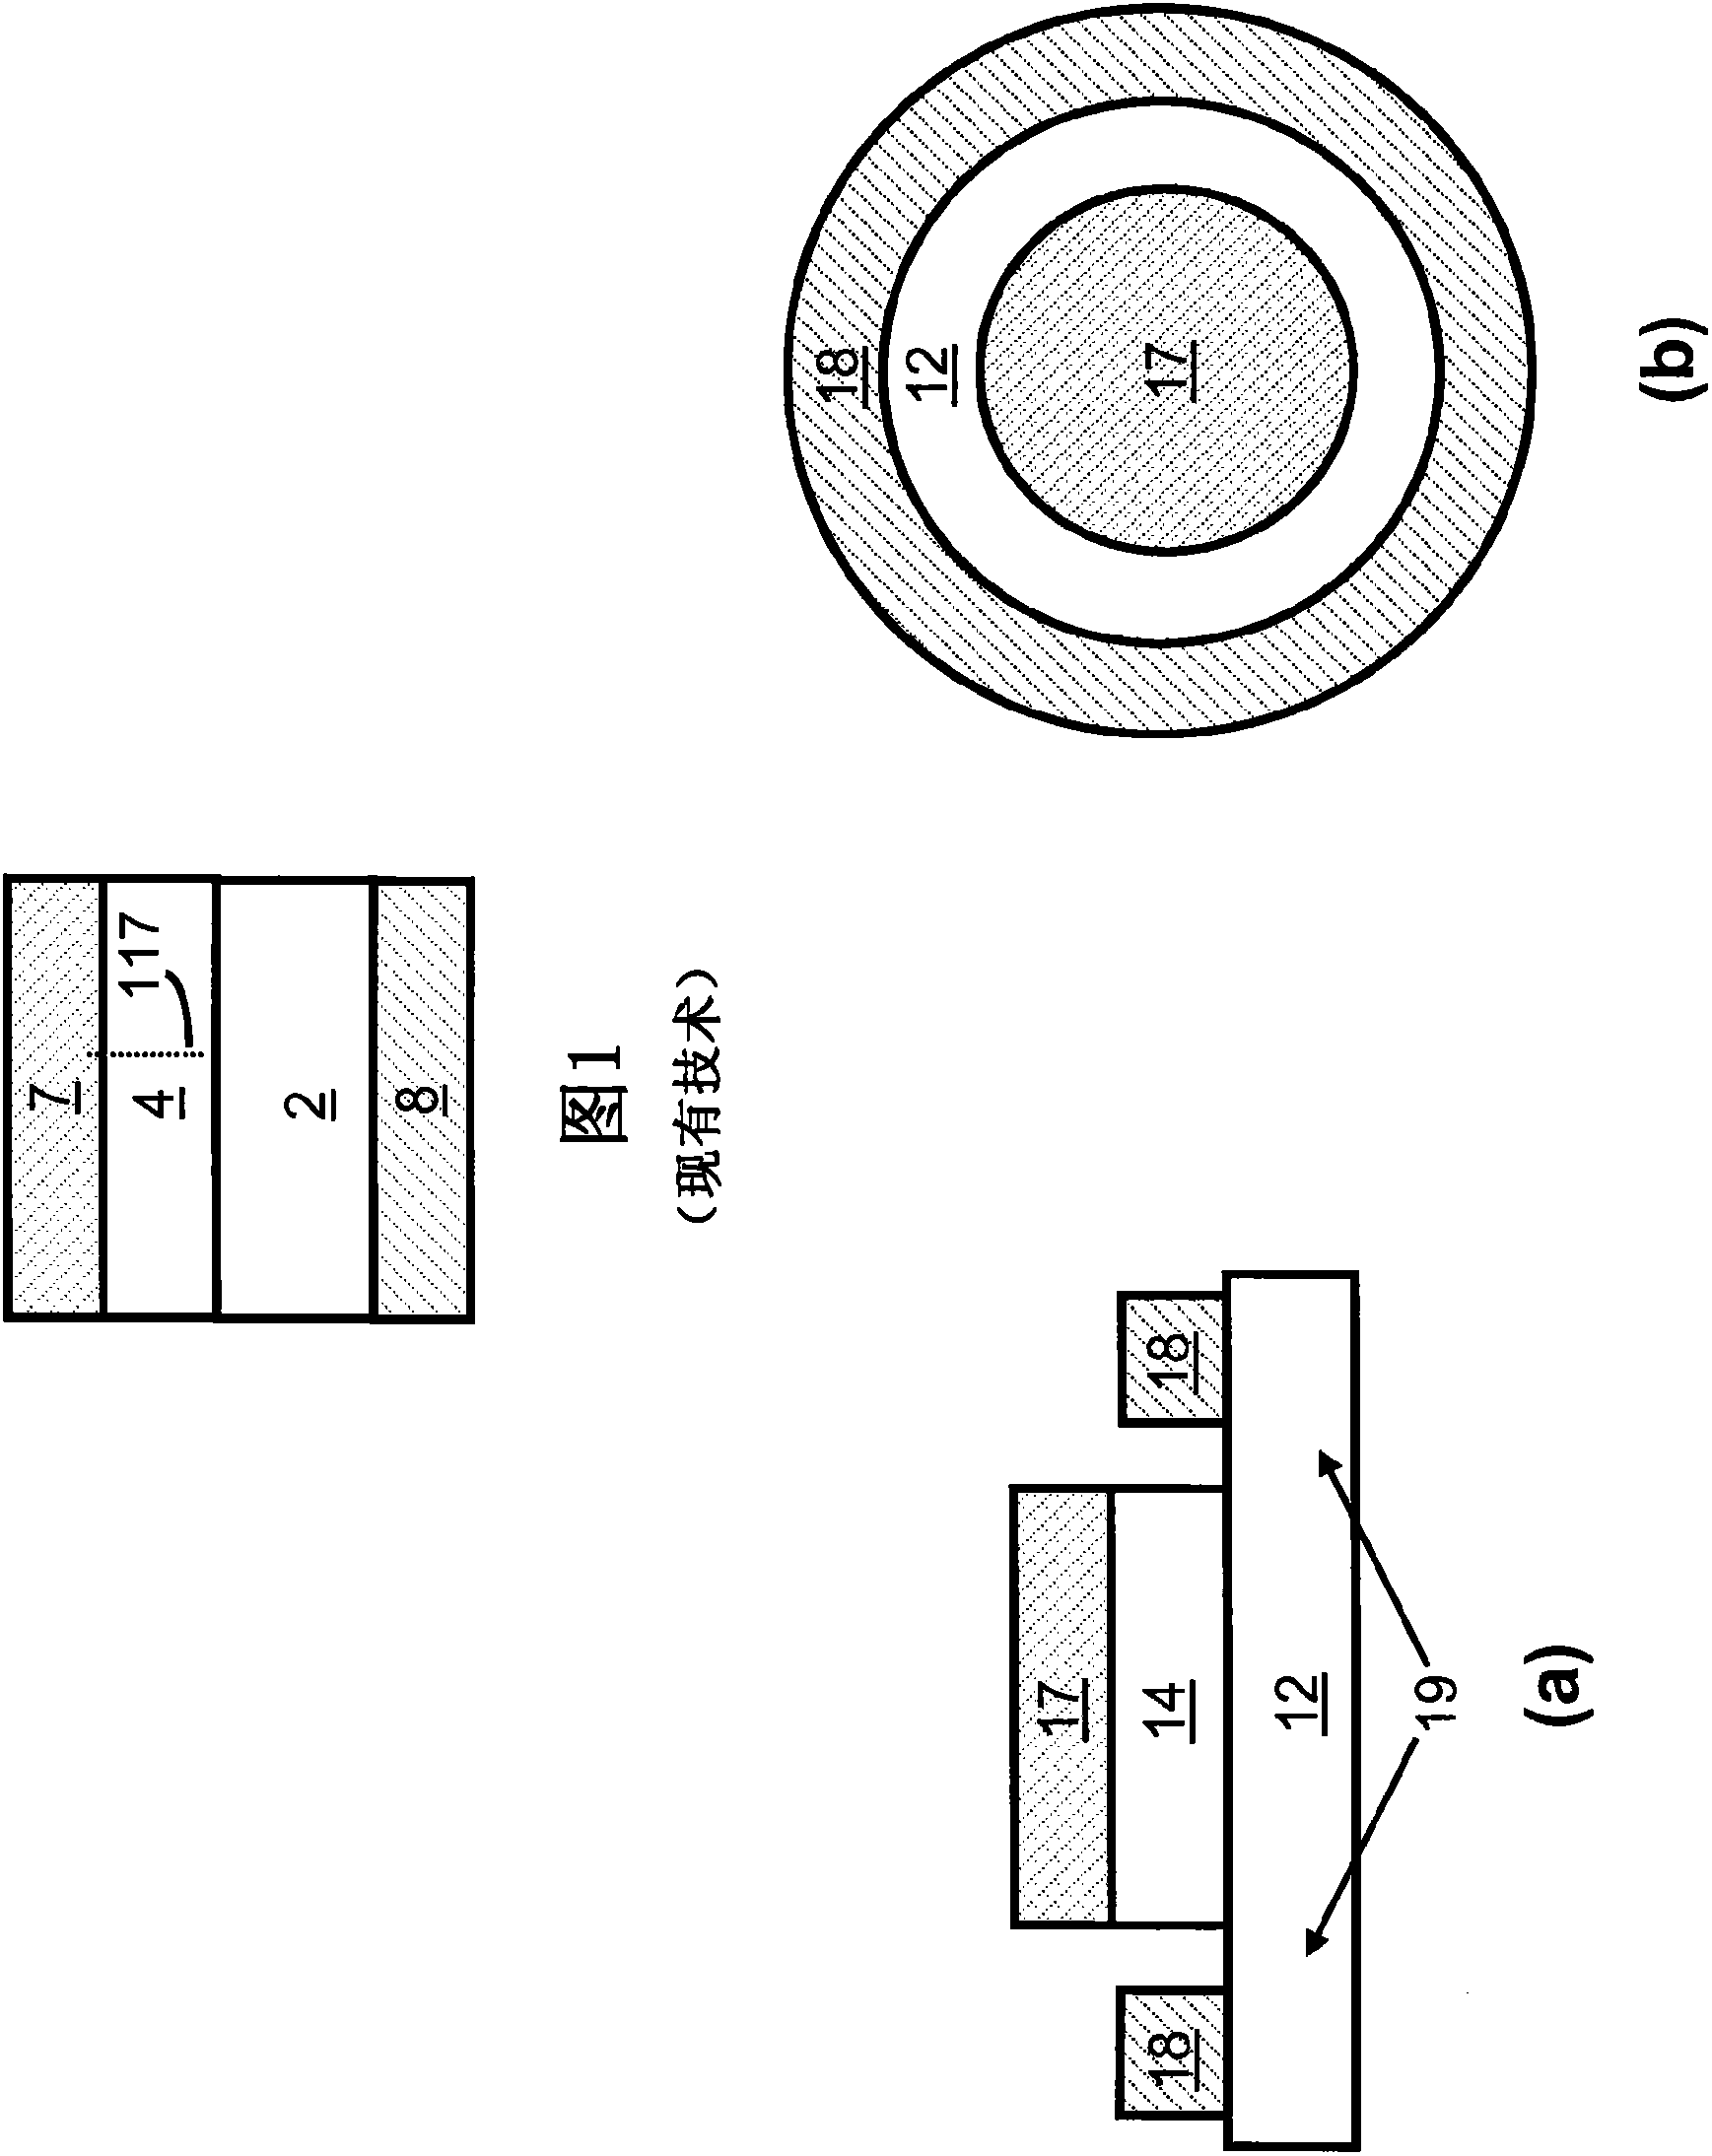 Semiconductor heterostructure diodes